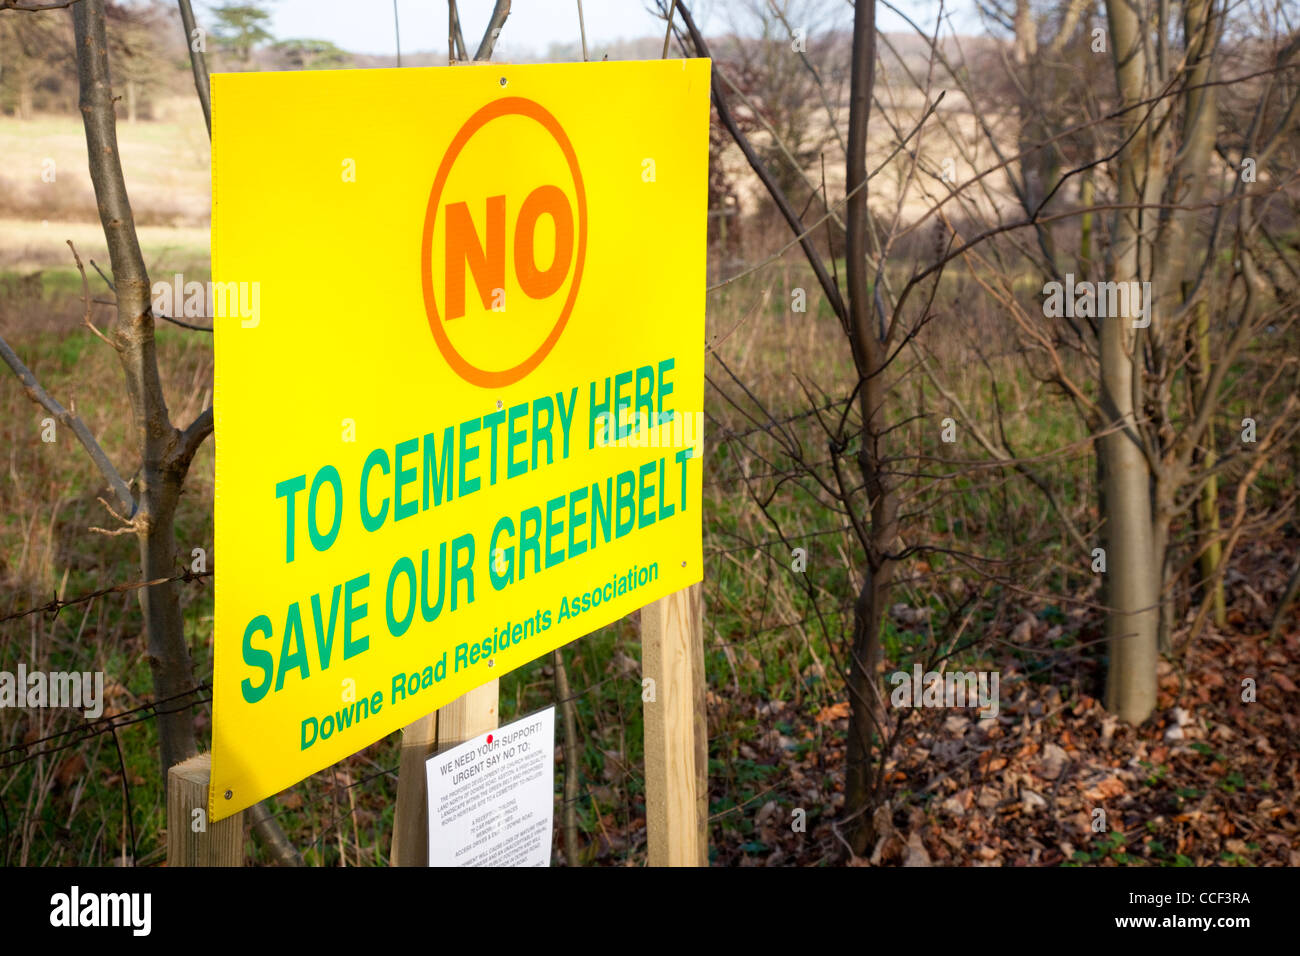 Protest sign, 'No Cemetery Here - Save Our Green Belt'. Downe, Kent, UK Stock Photo